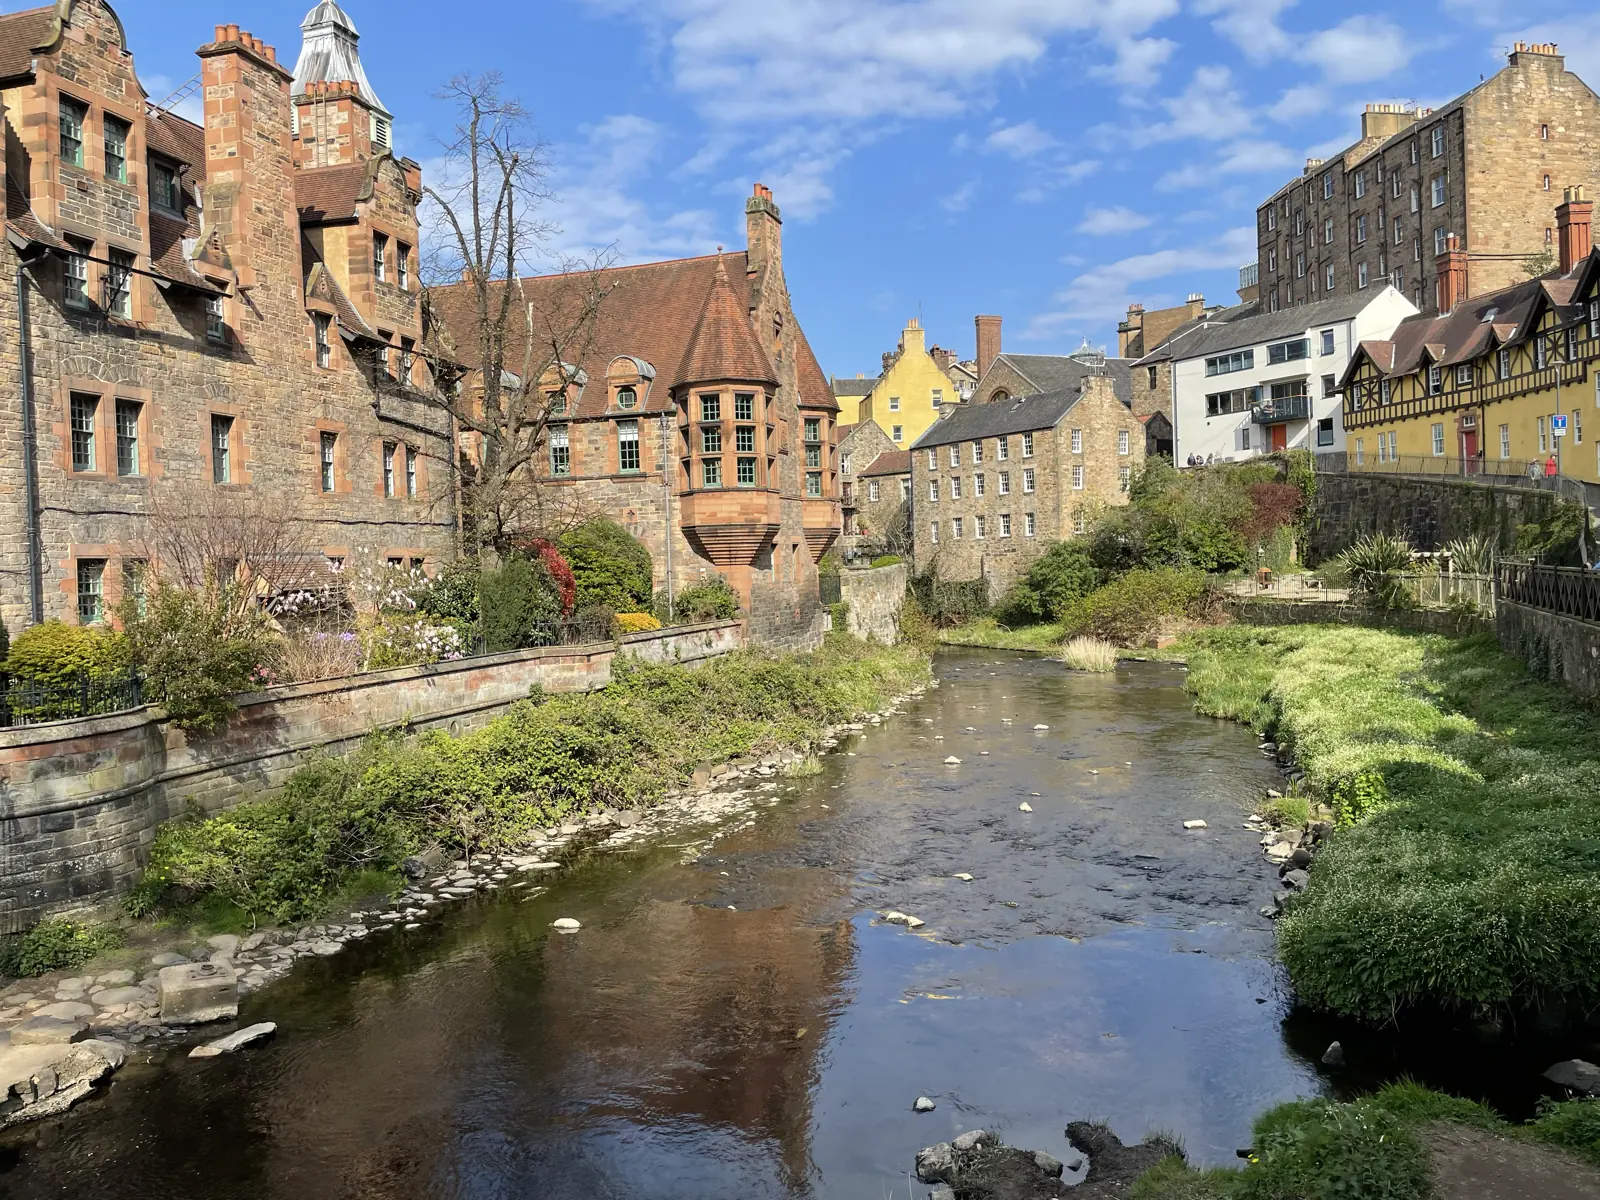 View of Edinburgh looking down a river with Edwardian architecture buildings along it